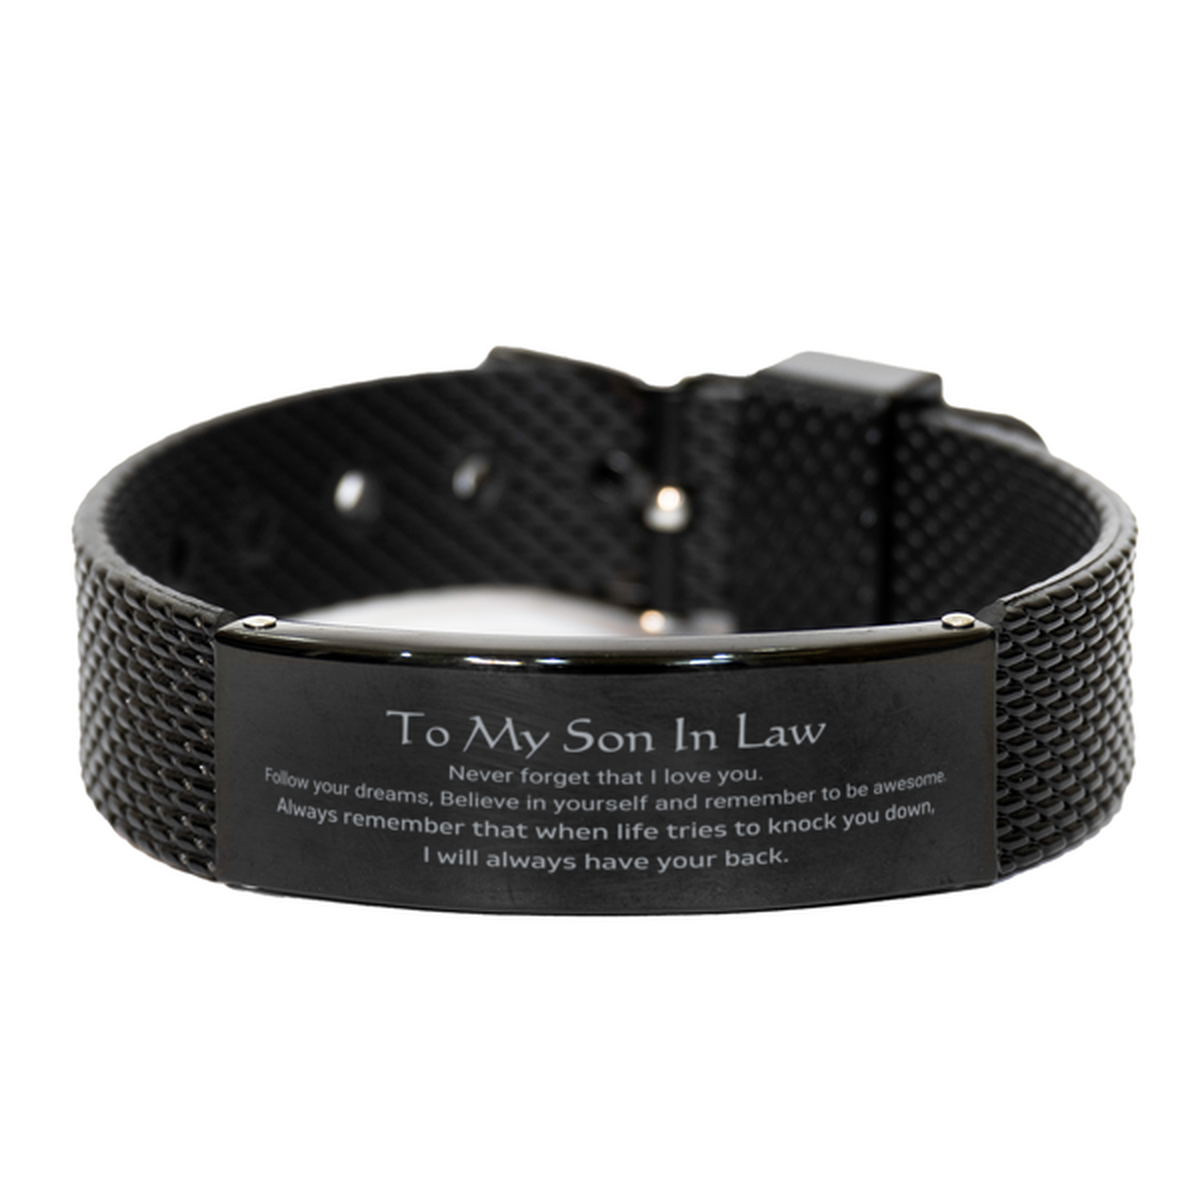 Inspirational Gifts for Son In Law, Follow your dreams, Believe in yourself, Son In Law Black Shark Mesh Bracelet, Birthday Christmas Unique Gifts For Son In Law